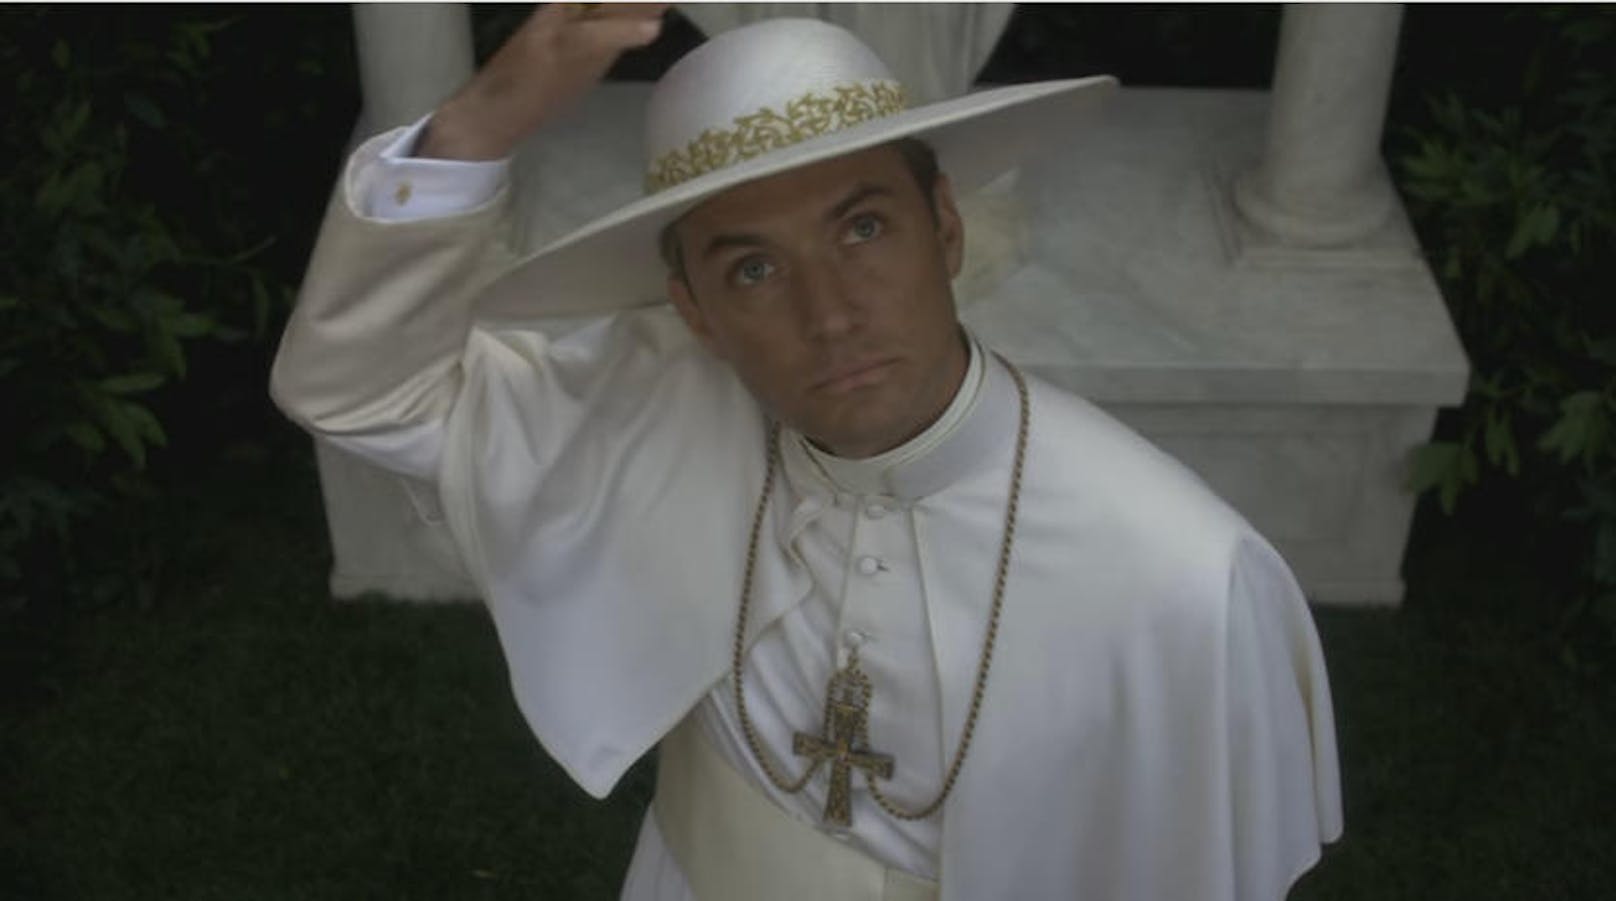 Jude Law als Papst Pius XIII. in "The Young Pope".